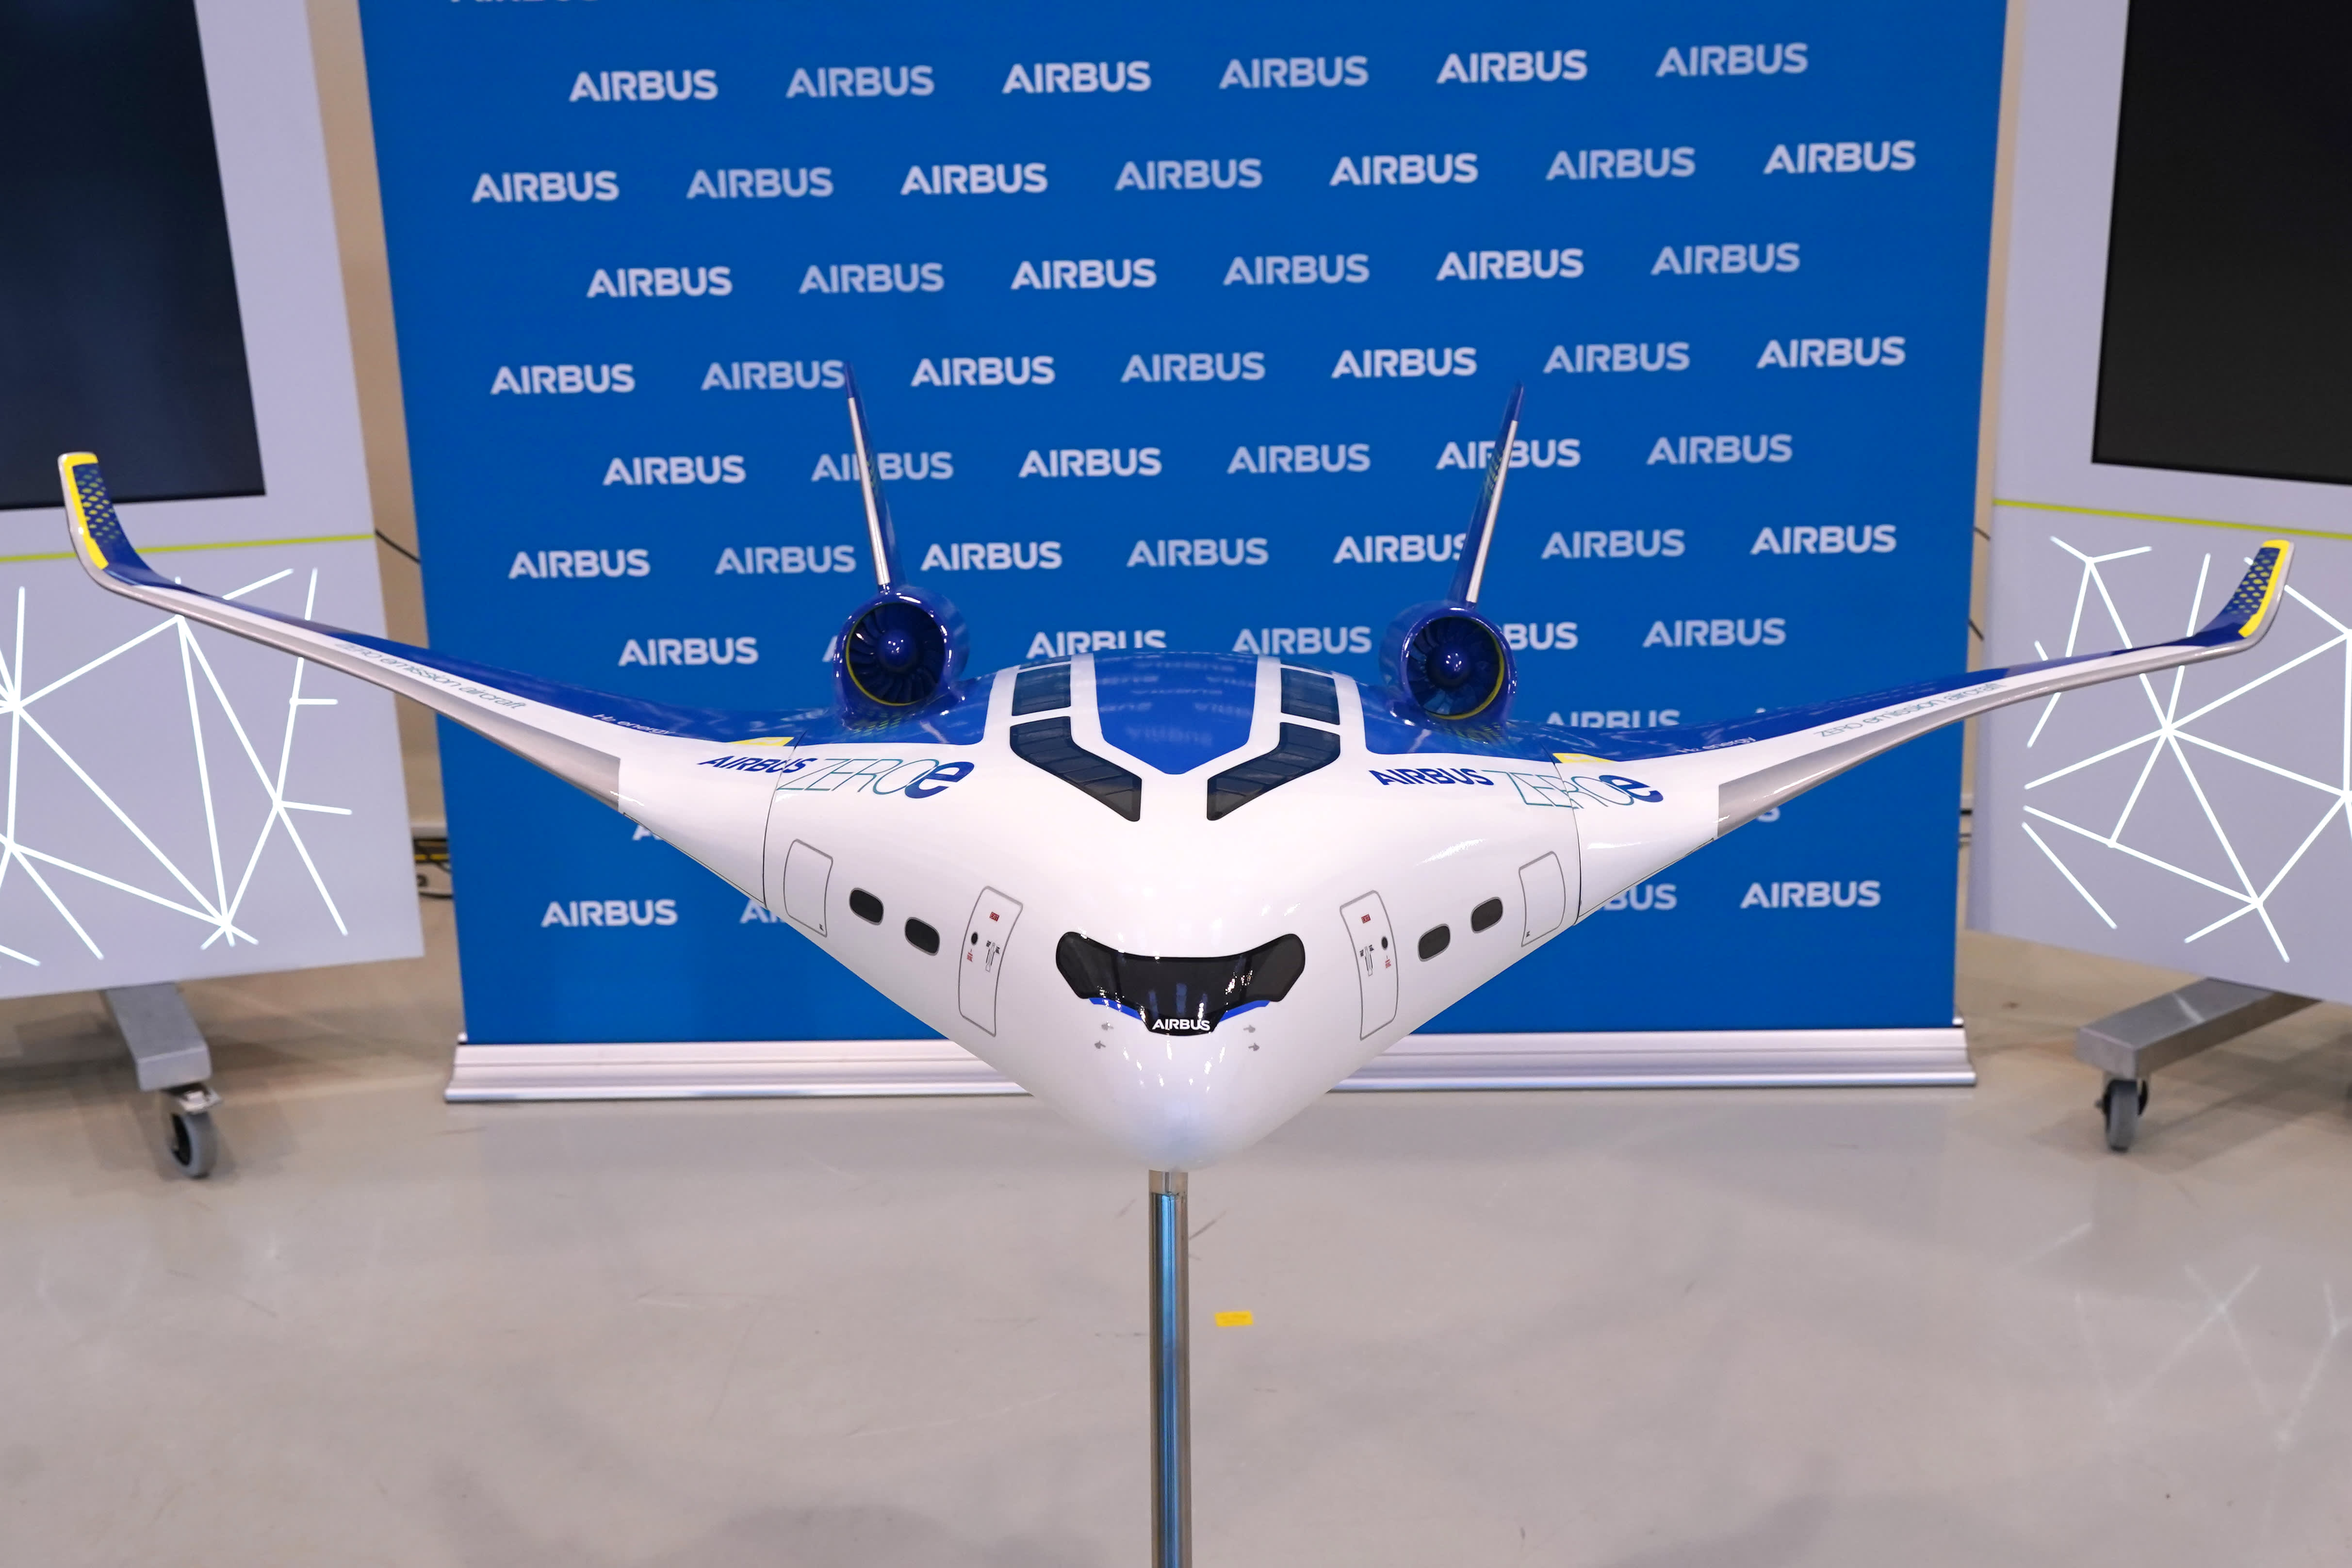 Airbus CEO says hydrogen plane is ‘the ultimate solution’ but cautions a lot of work lies ahead